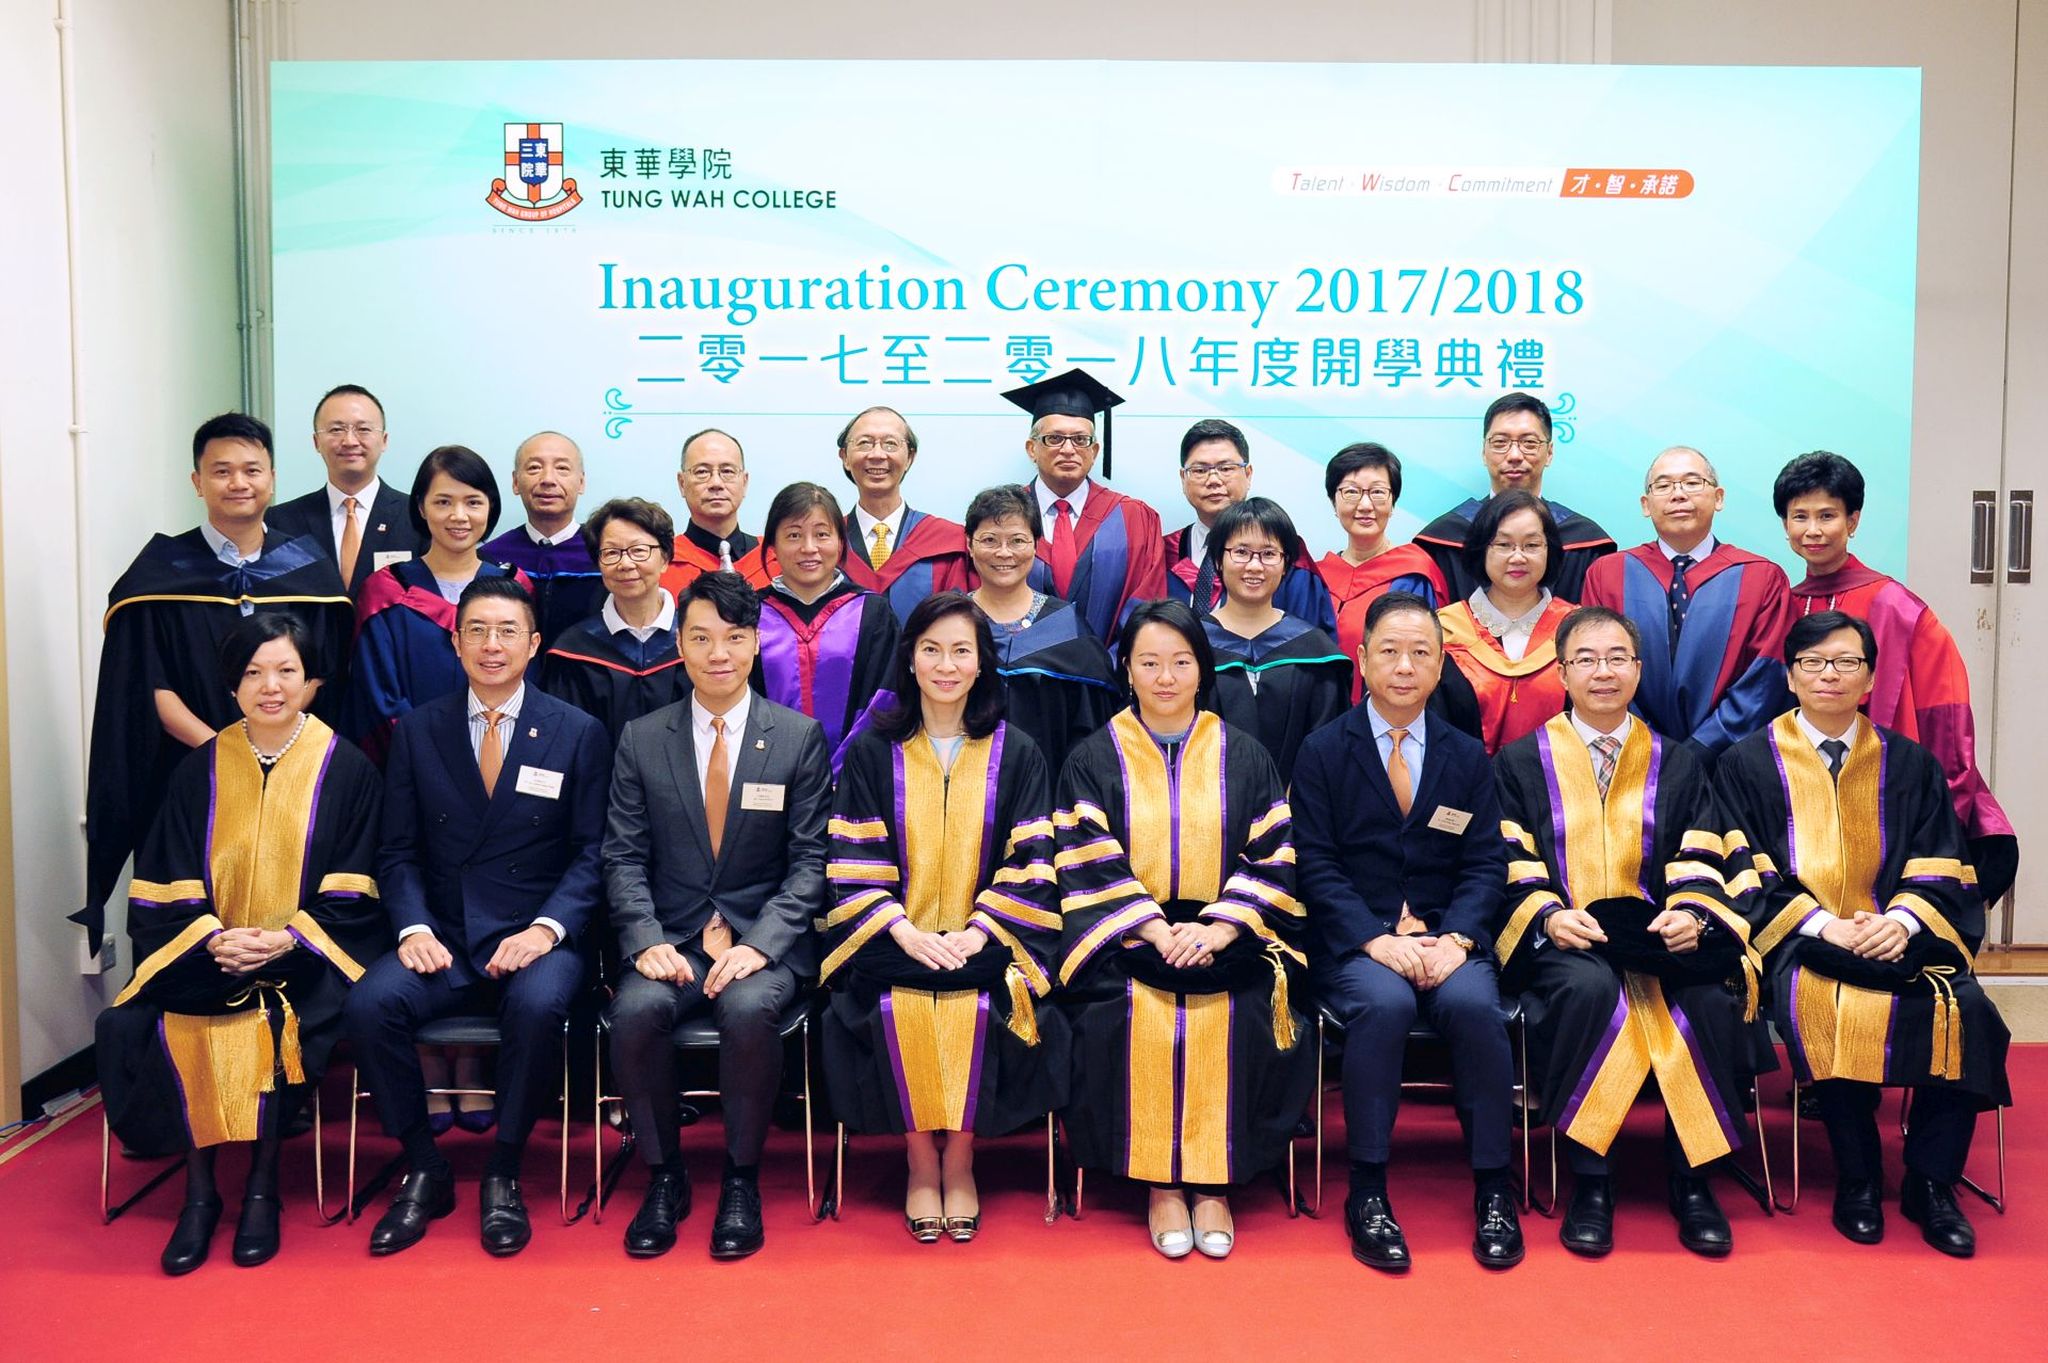 Tung Wah College Inauguration Ceremony 2017/2018